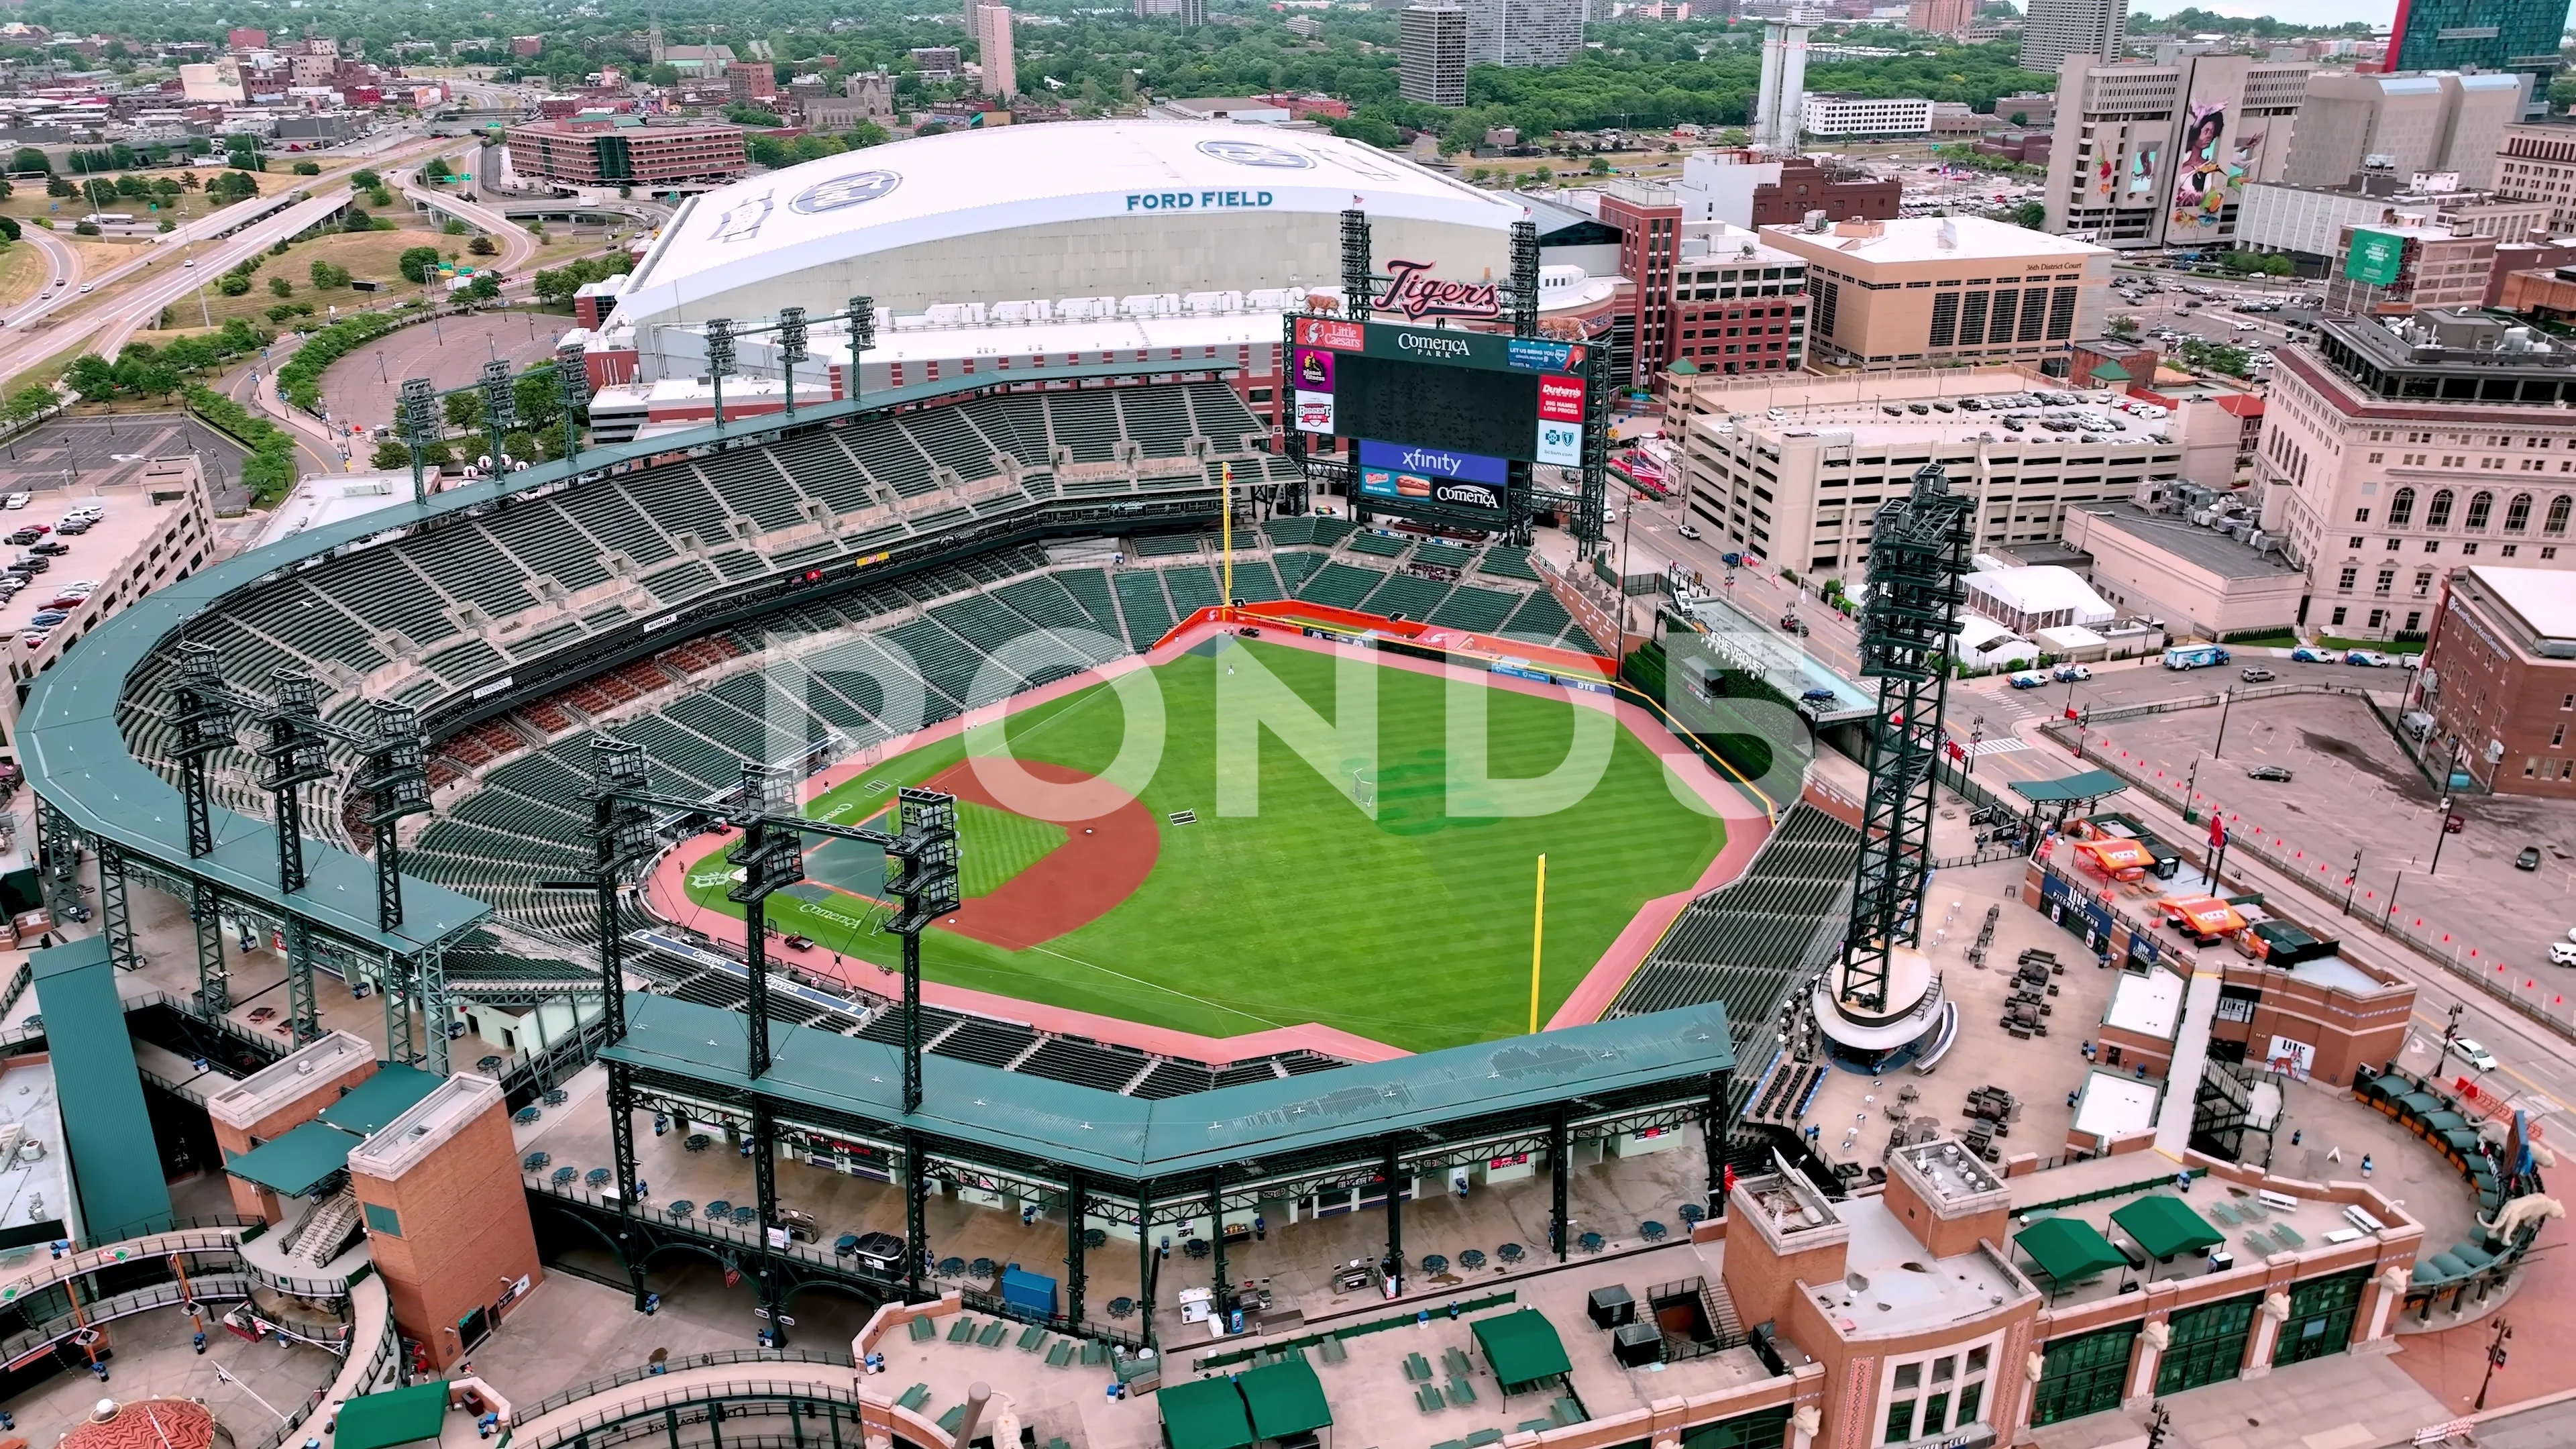 Stadium countdown: Comerica Park perfect for Tigers